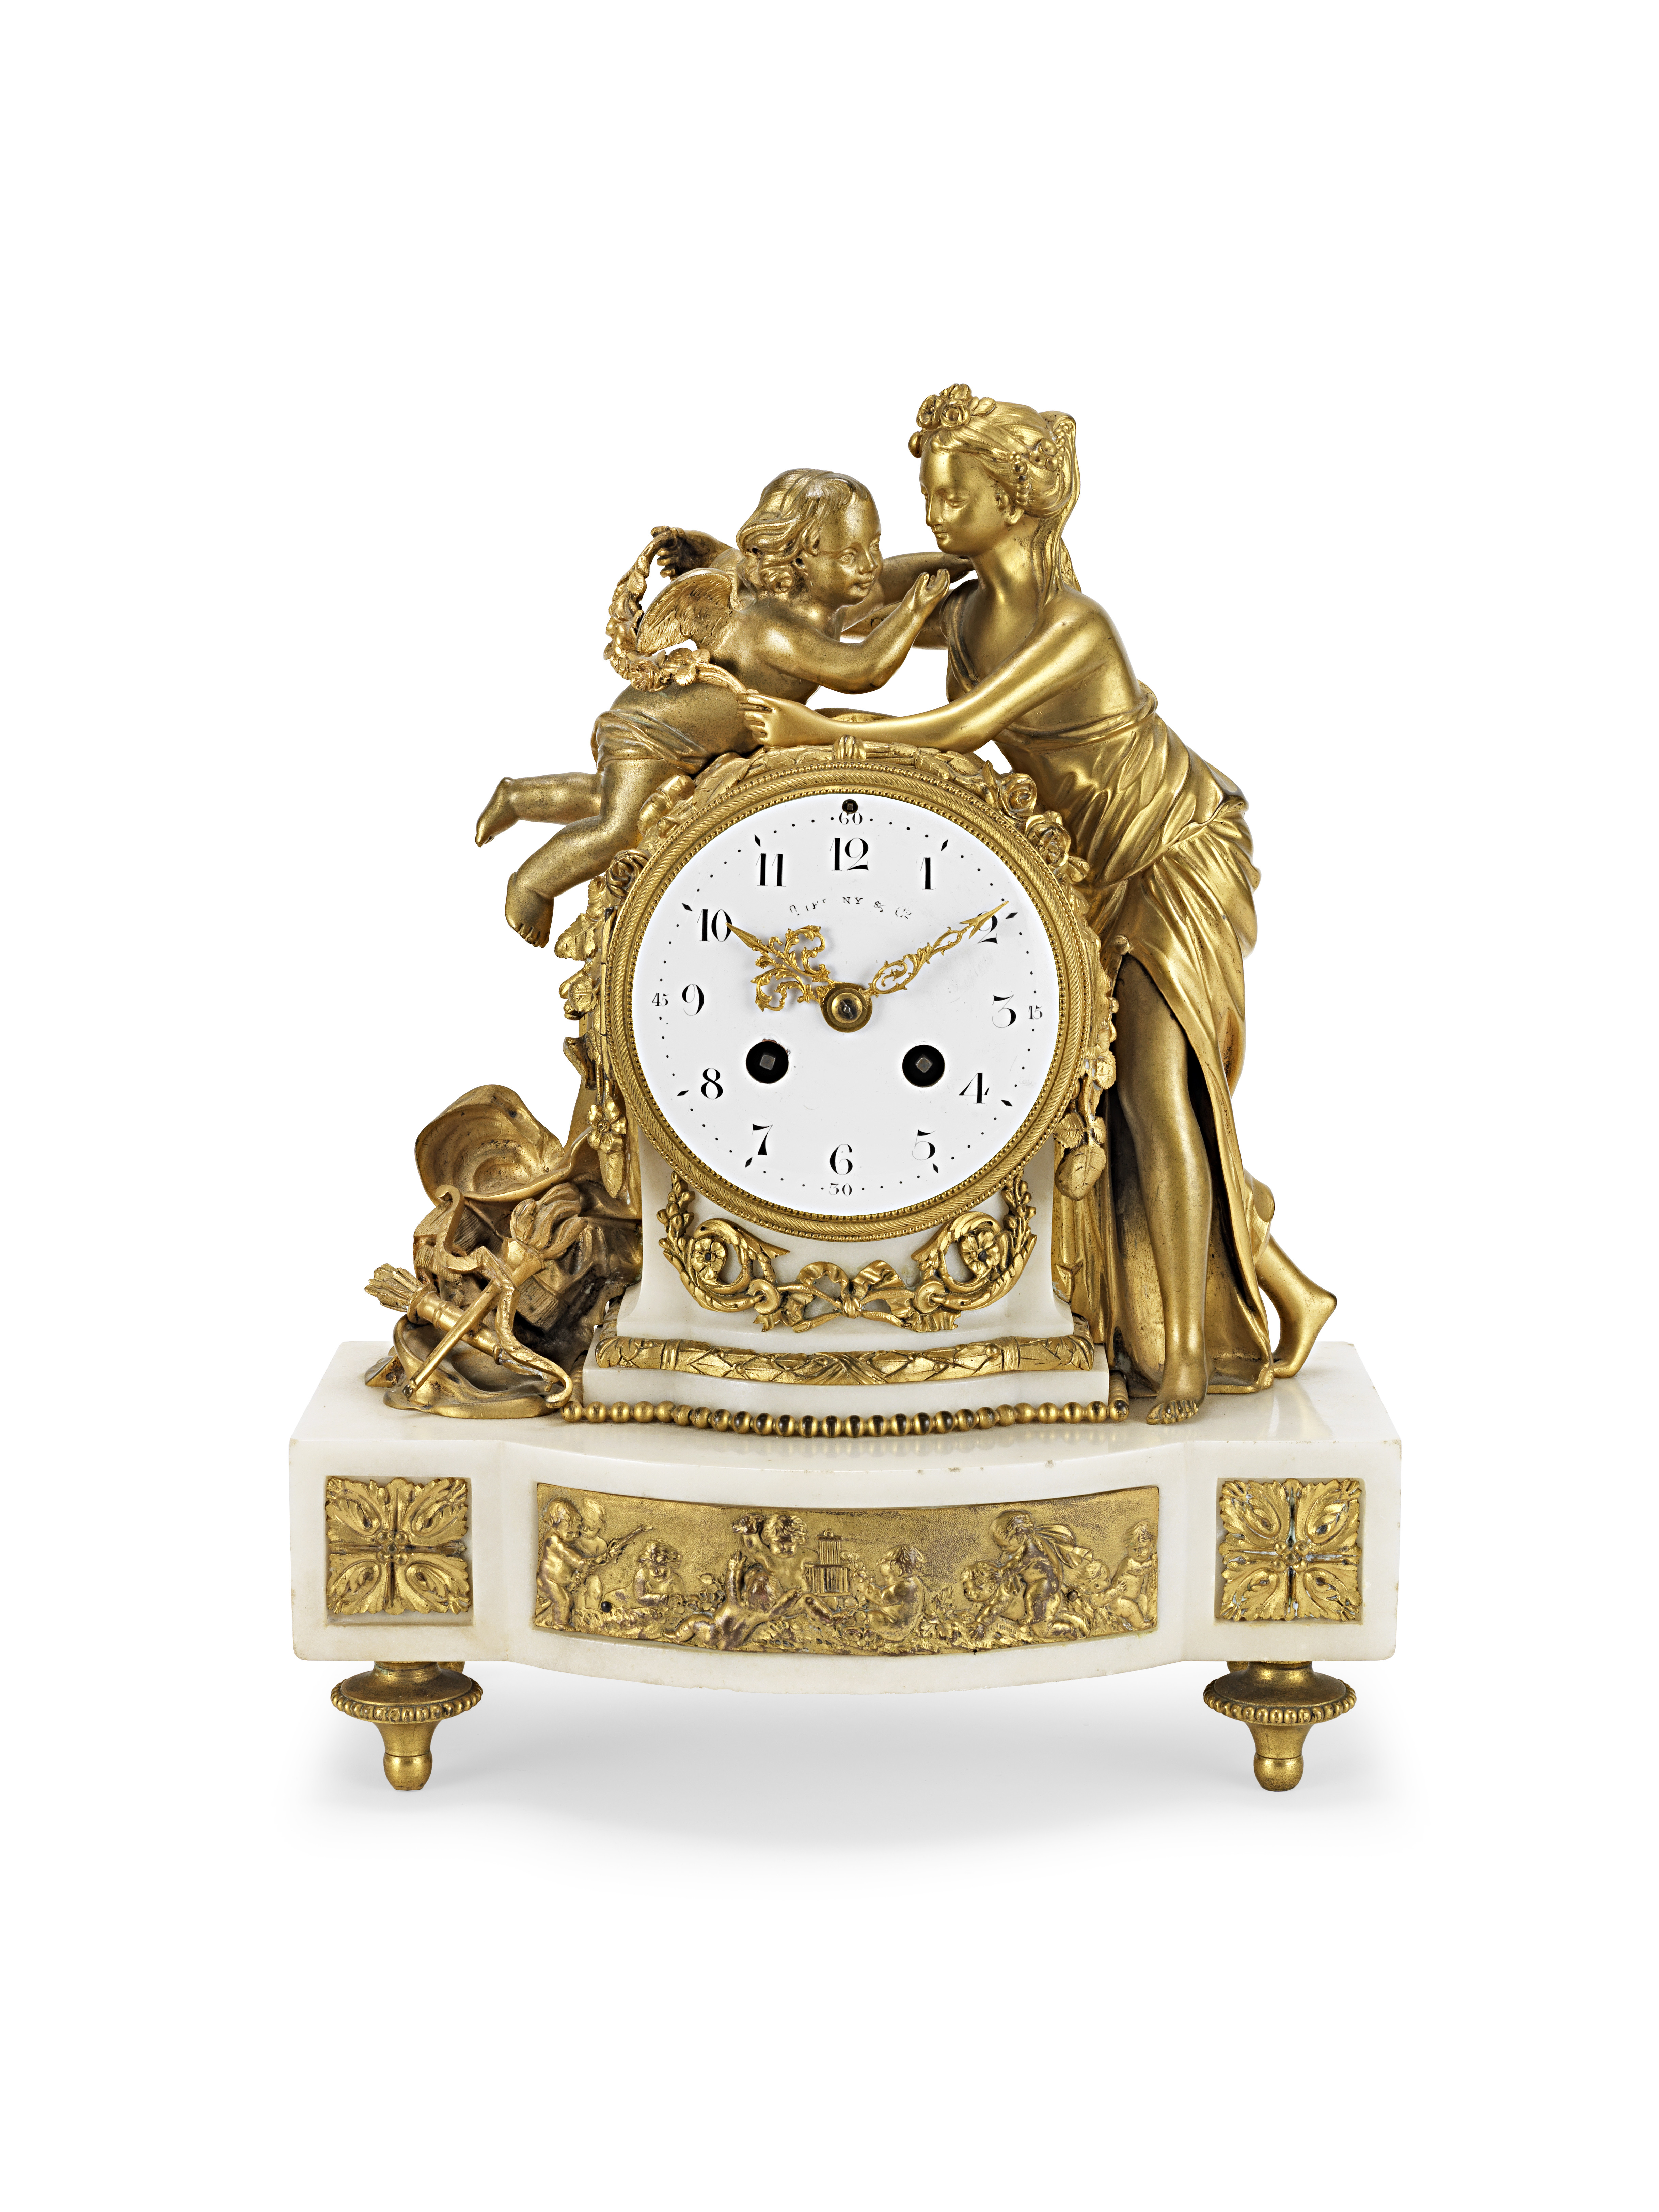 A Louis XVI style white marble mantel clock with gilt bronze mounts, the dial signed Tiffany & Co.